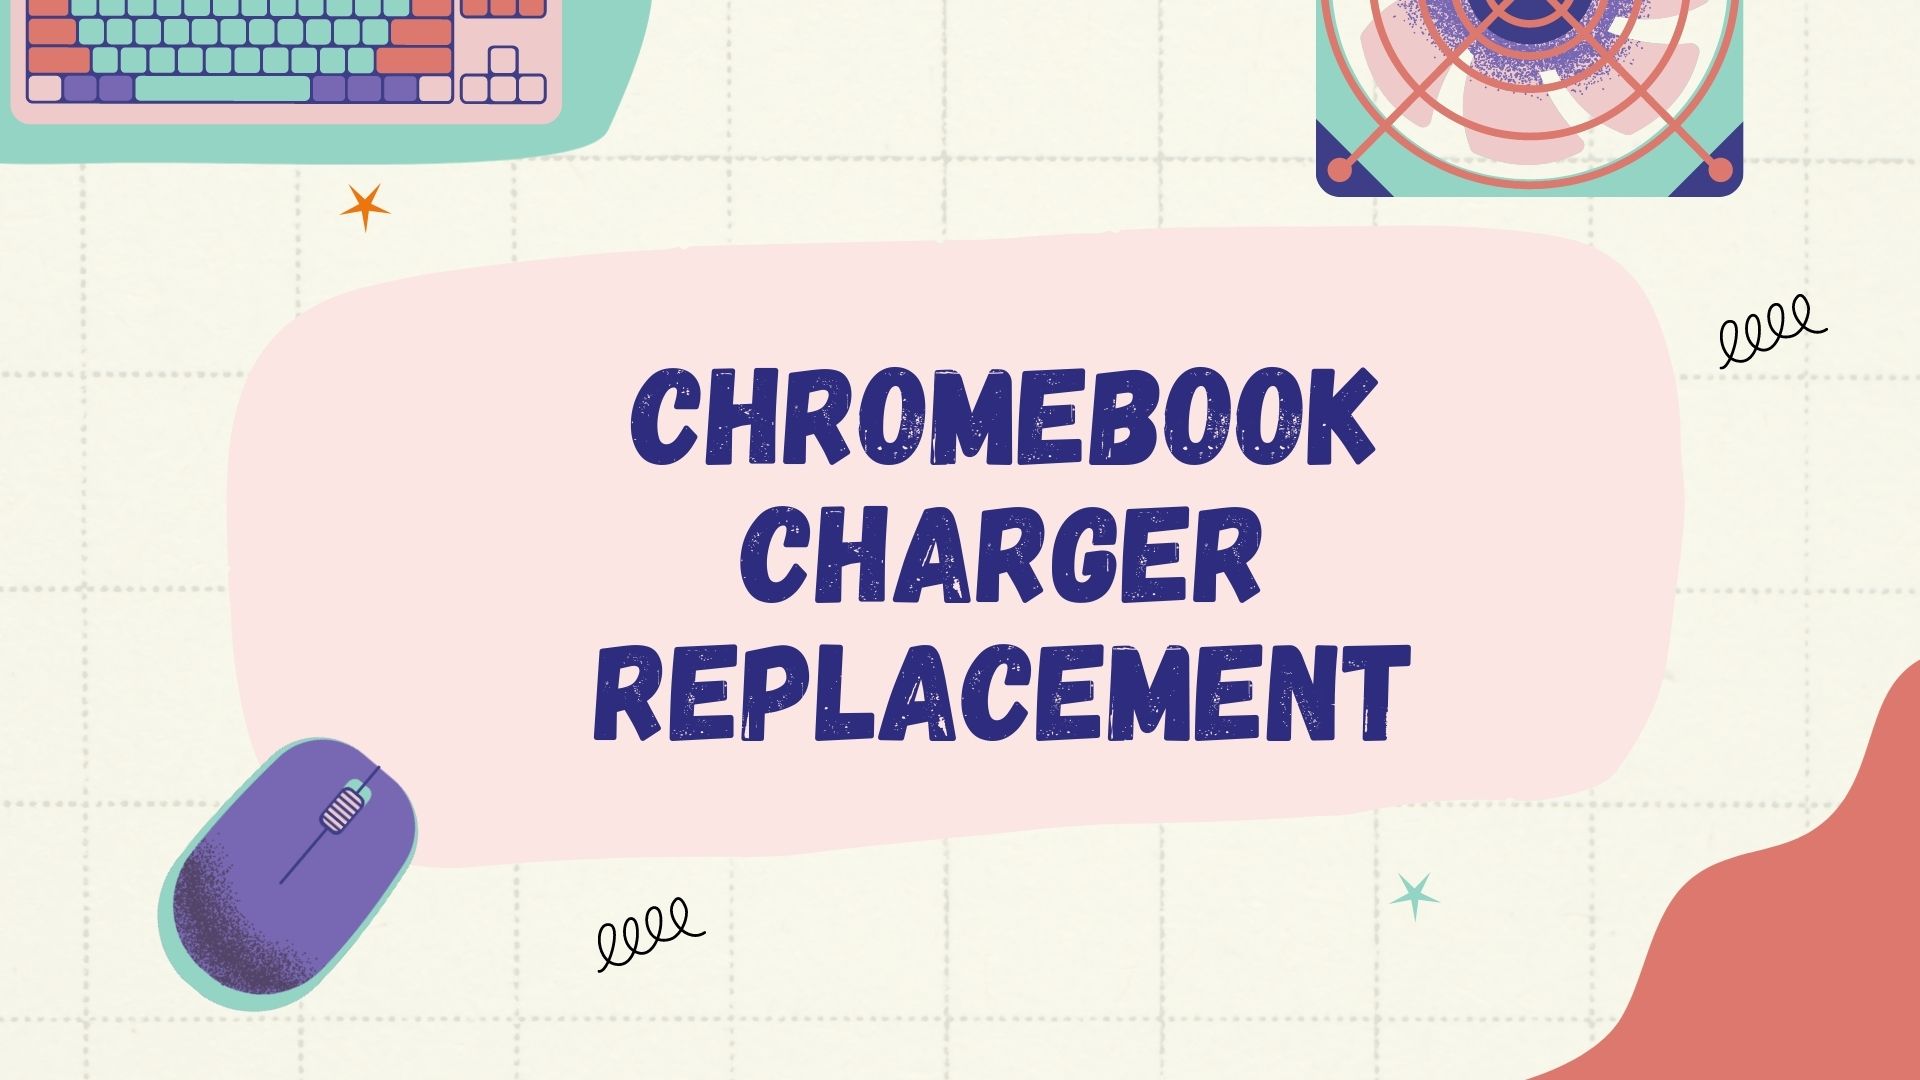 Chromebook charger replacement